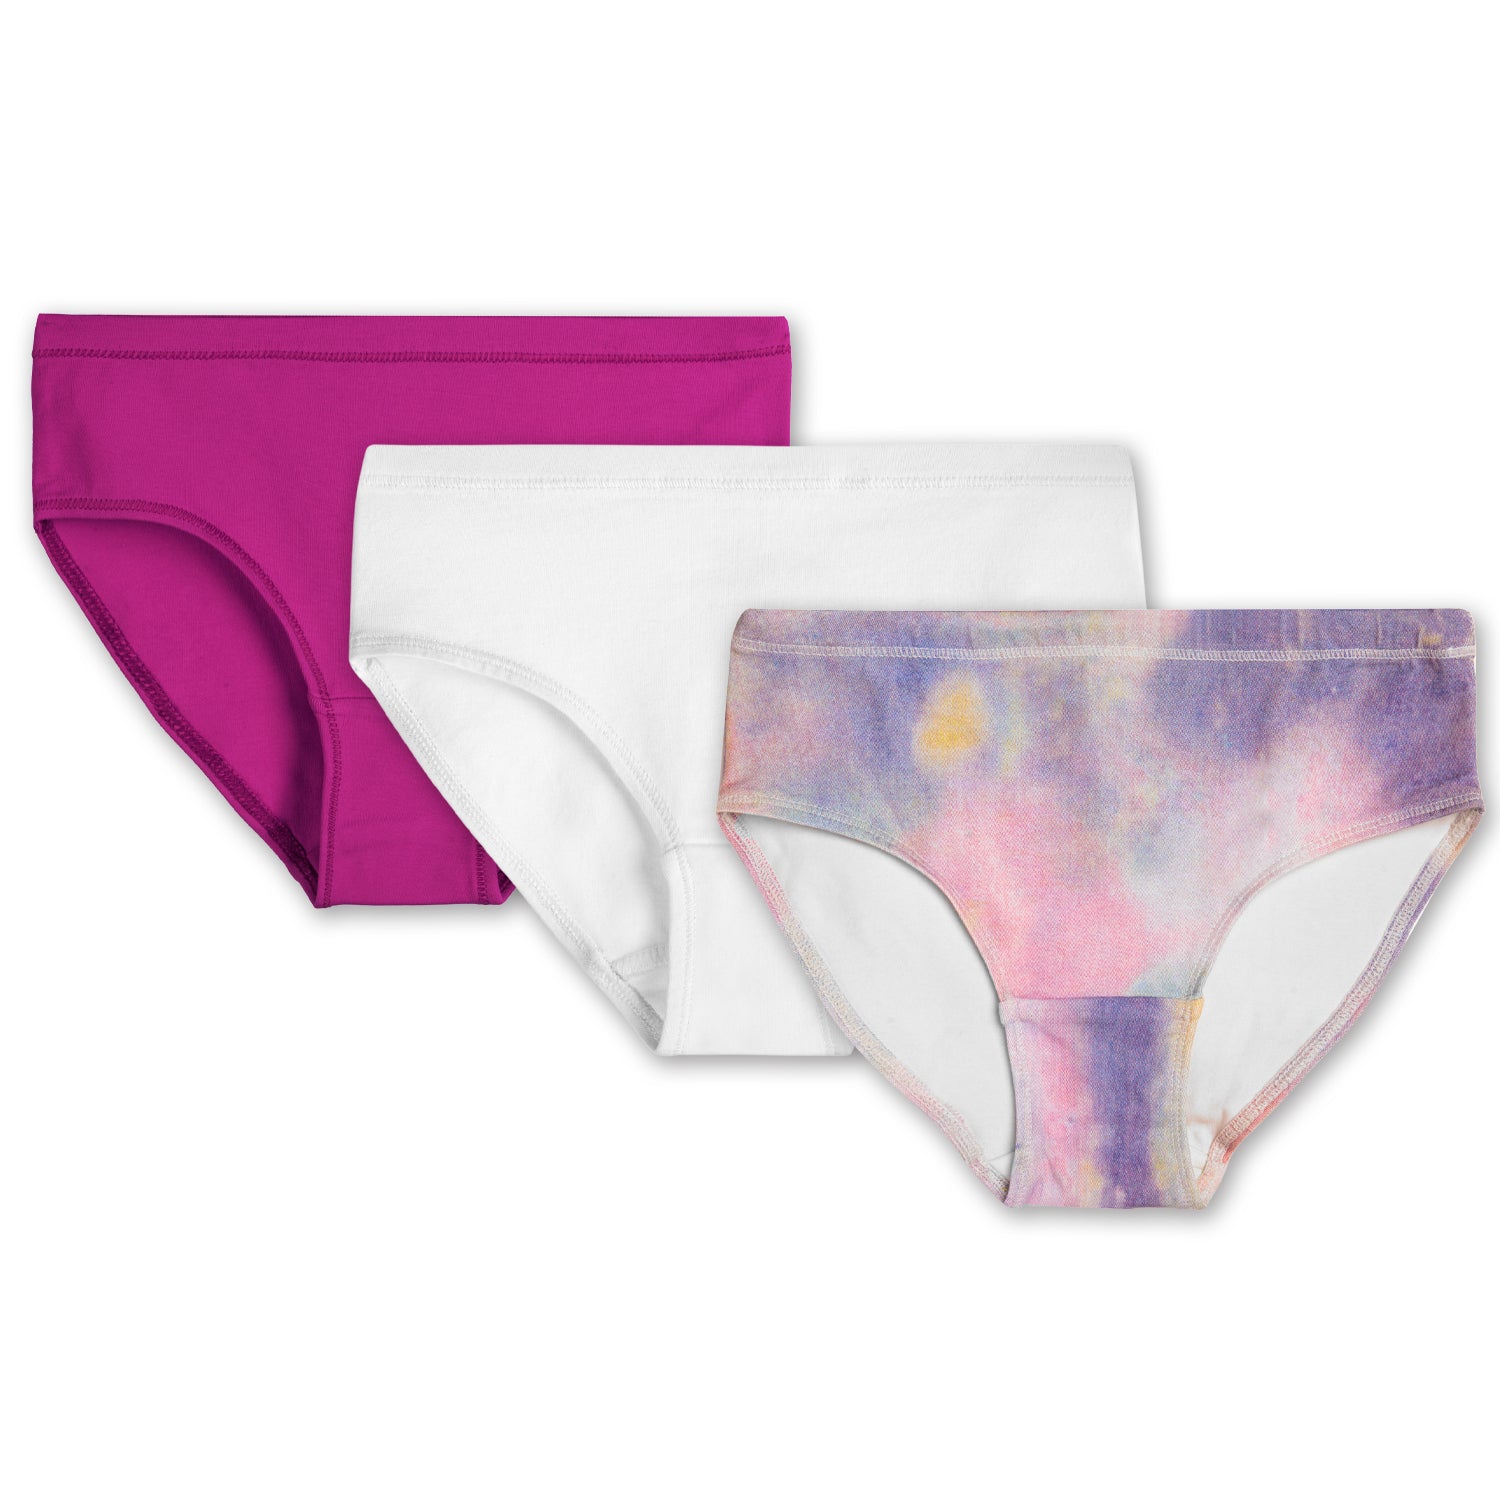 Girls Organic Cotton Hipster Underwear | Kids Panties Combo Pack of 3 |  Chemical-free & Spandex-free